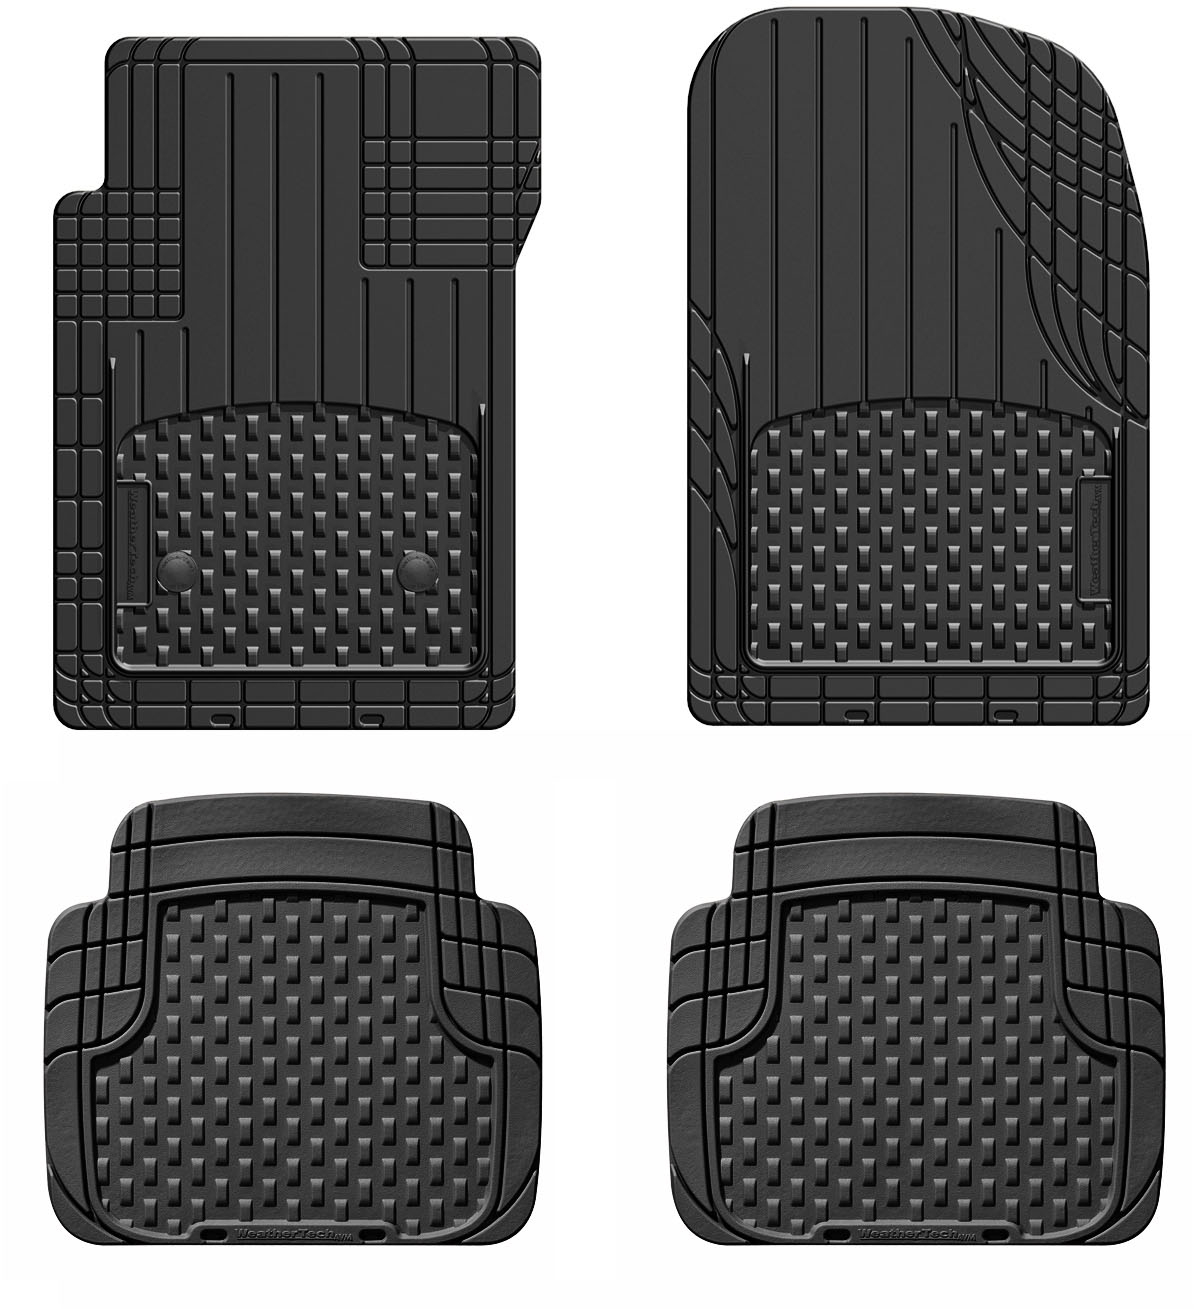 How to Get Weathertech Mats Black Again?